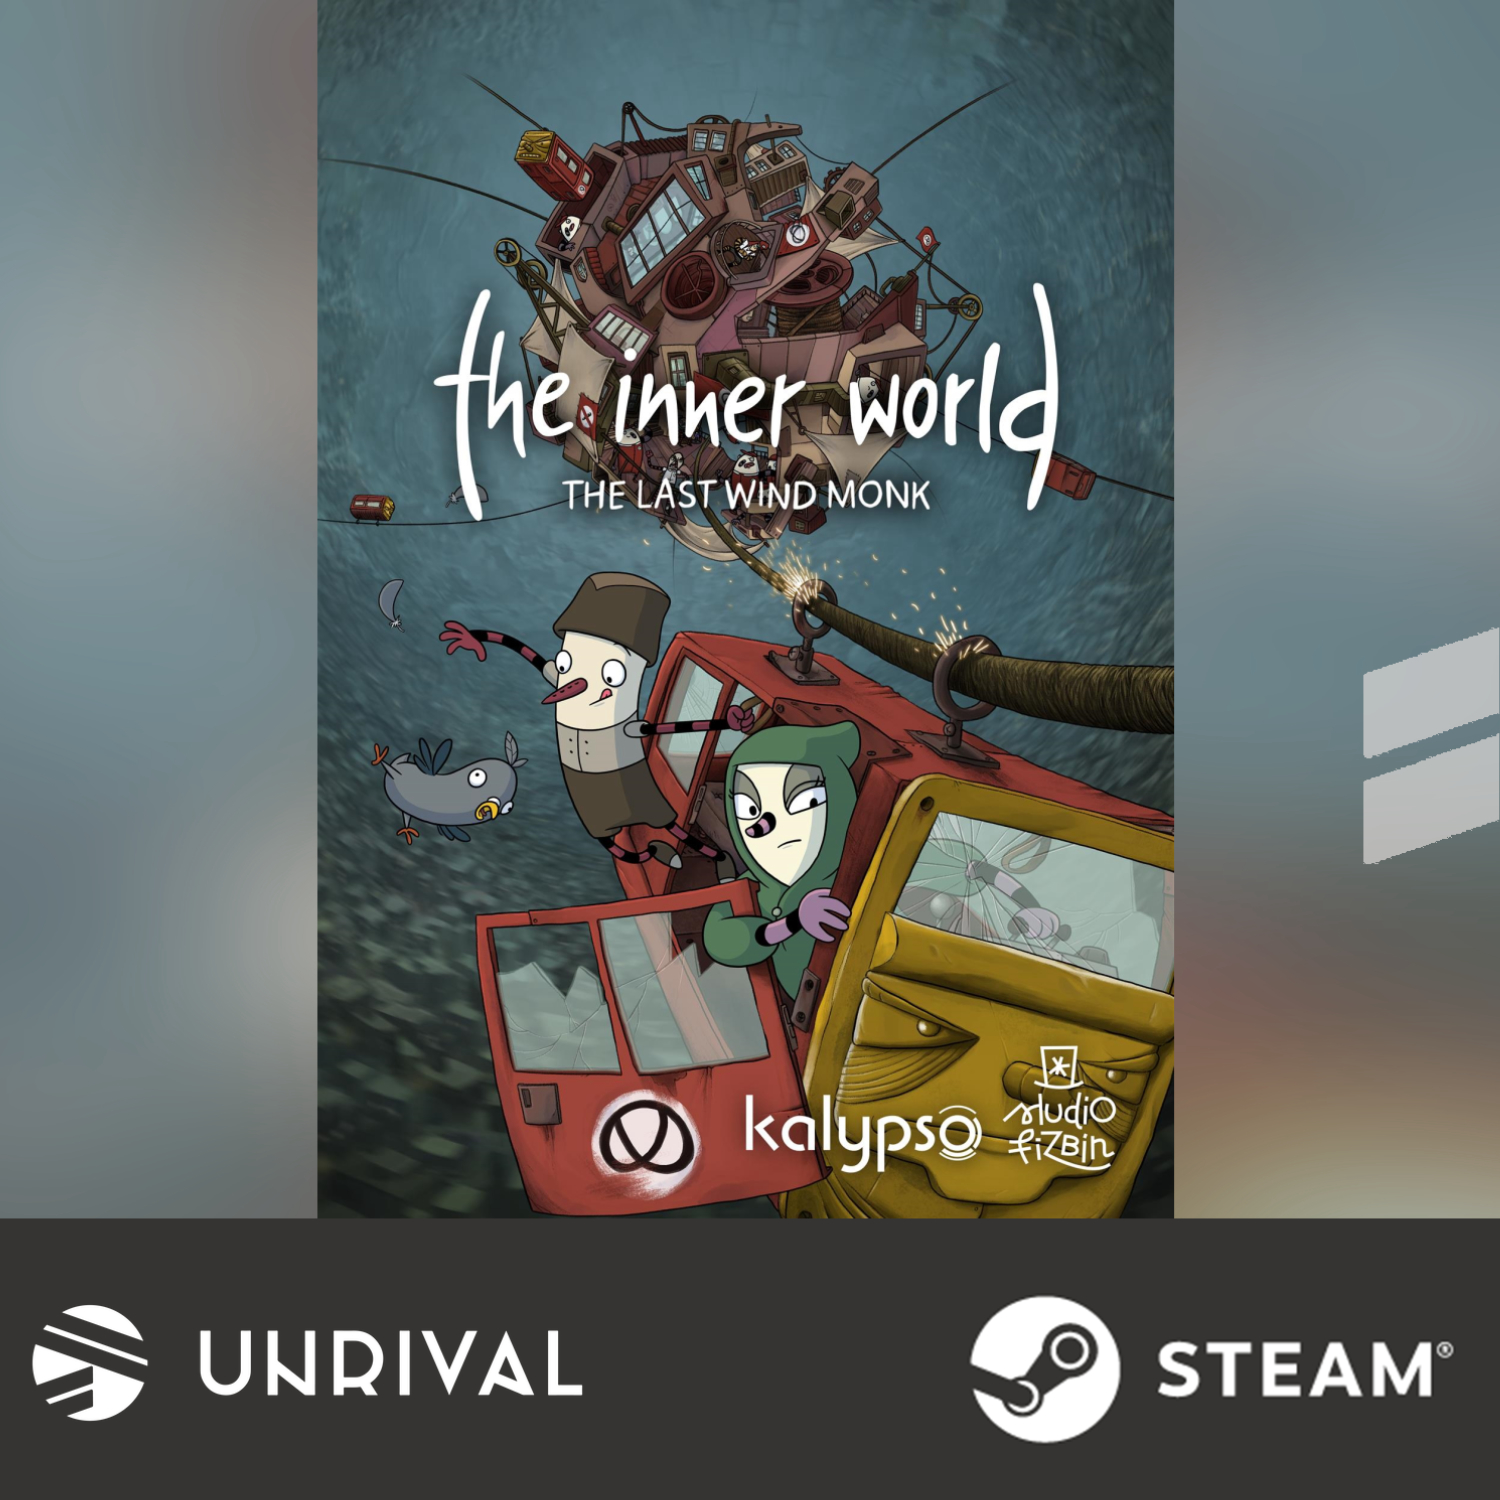 [Hot Sale] The Inner World - The Last Wind Monk PC Digital Download Game - Unrival